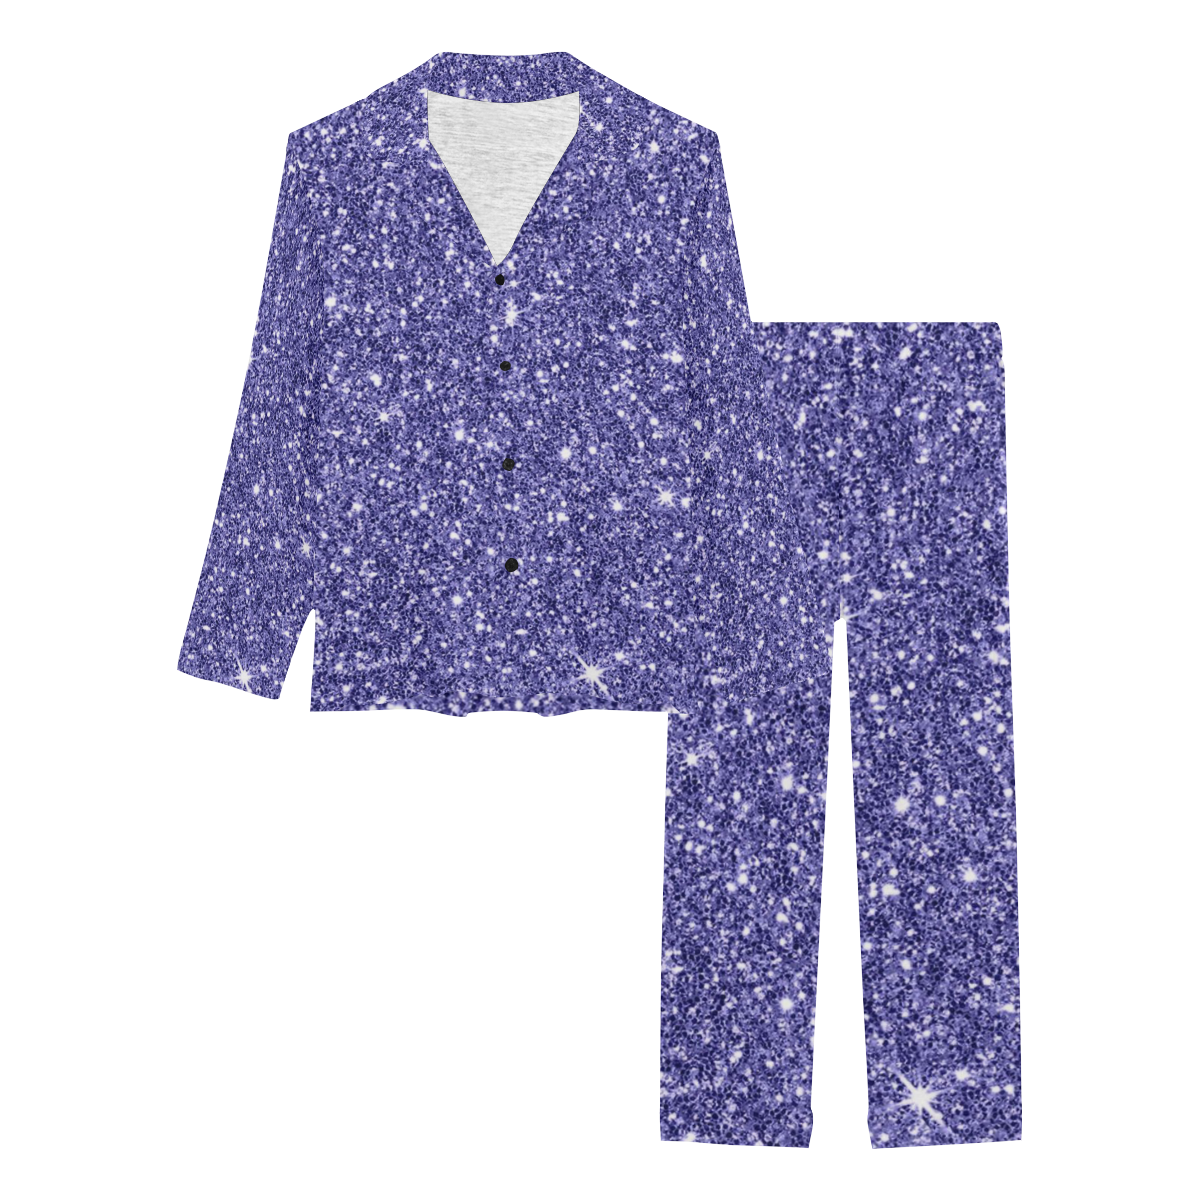 New Sparkling Glitter Print E by JamColors Women's Long Pajama Set